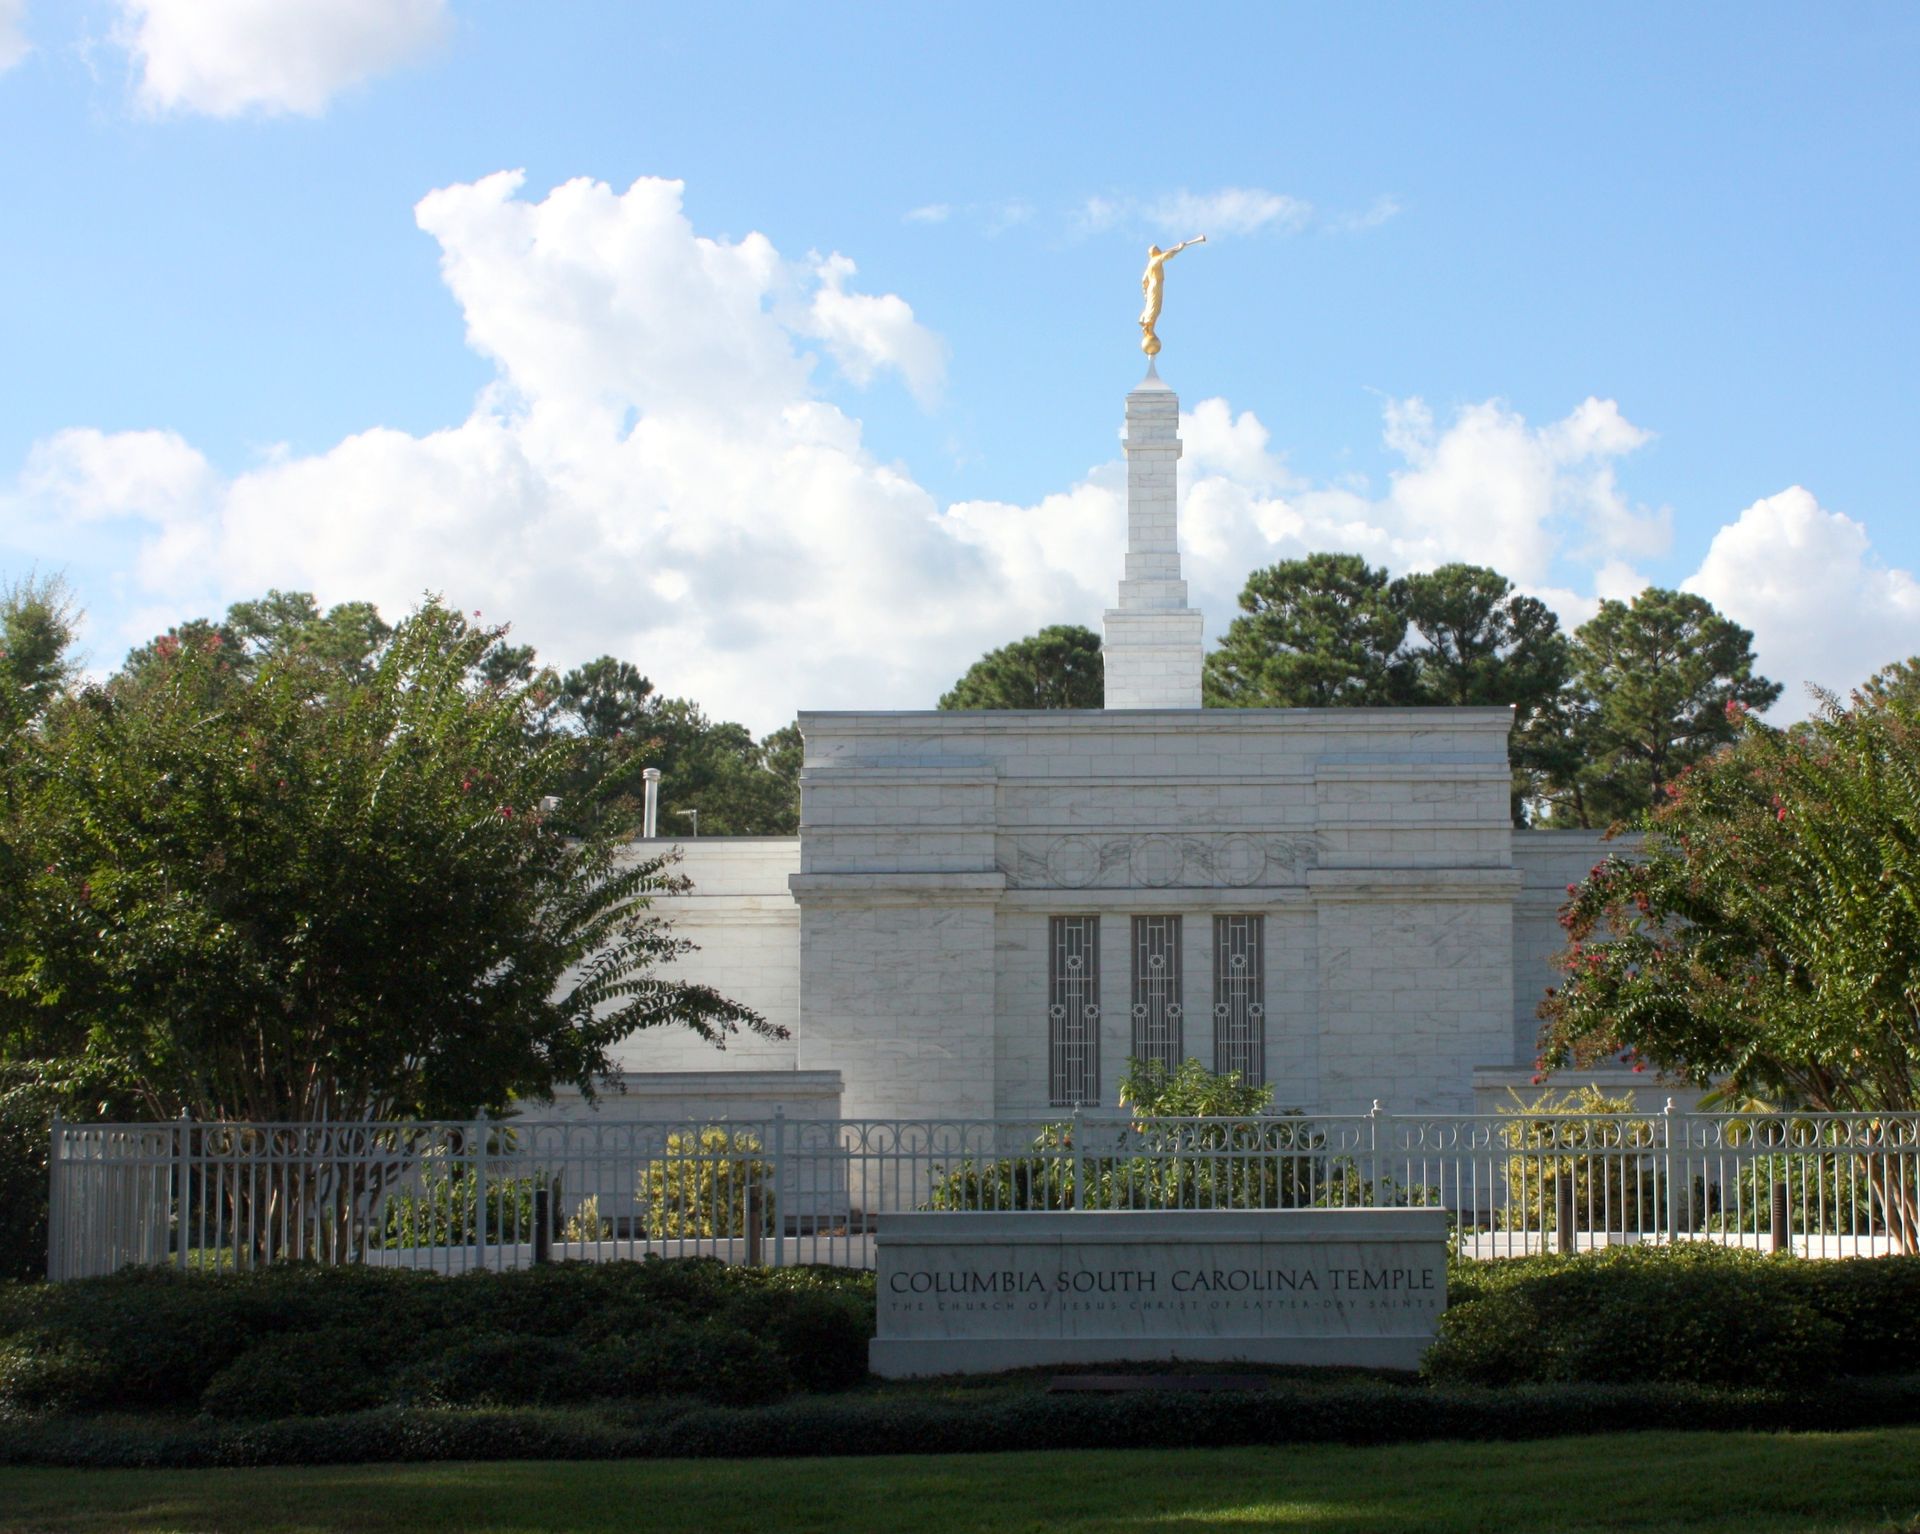 The temple name sign in front of the Columbia South Carolina Temple.